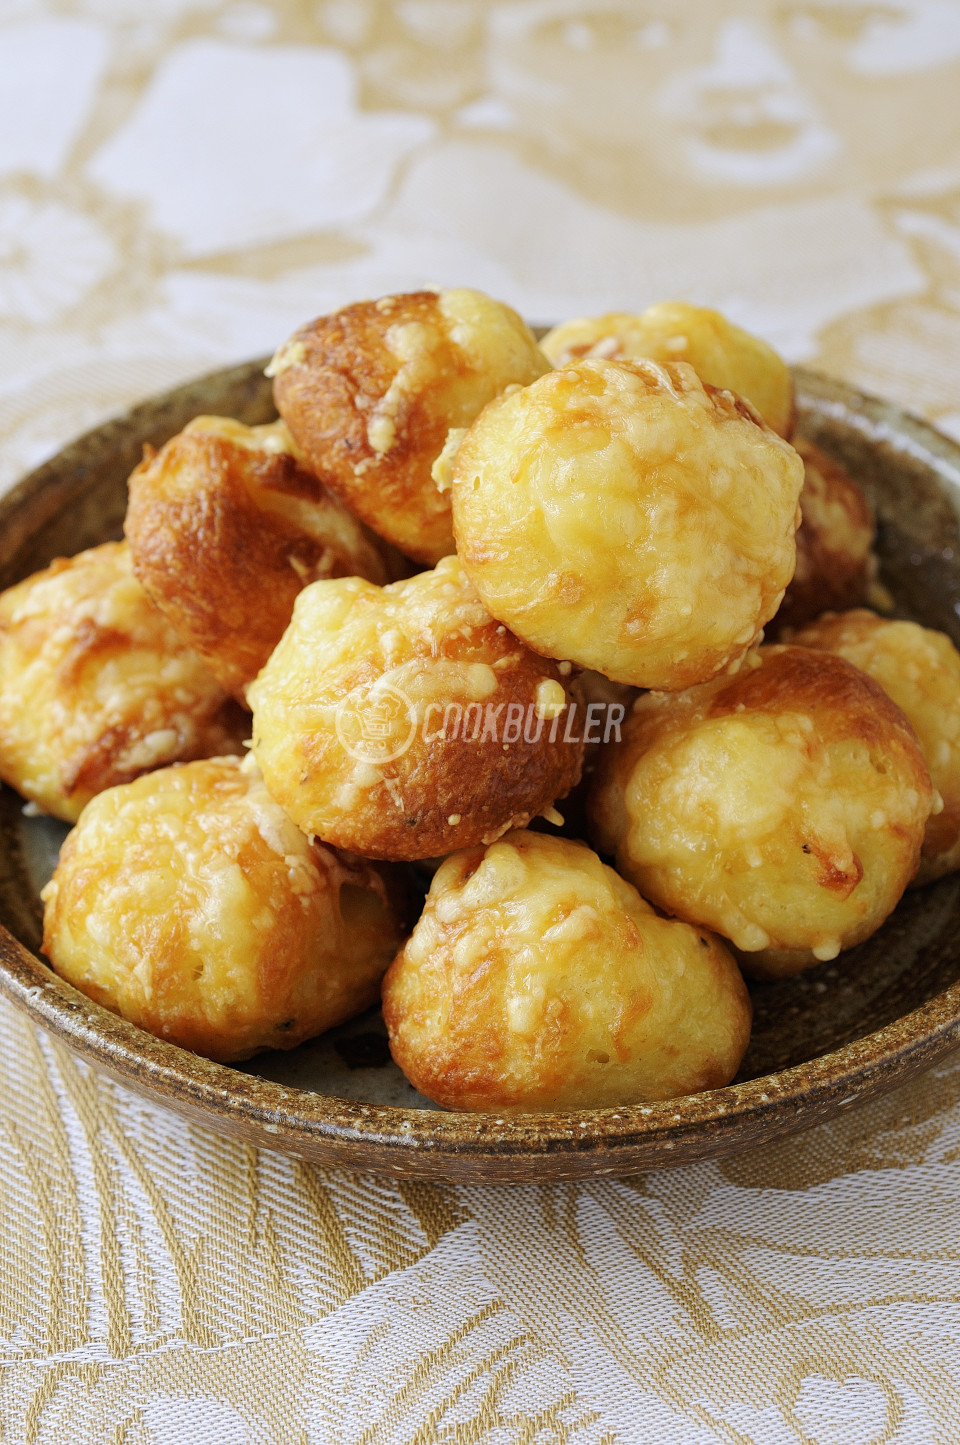 Gougeres au fromage (choux pastries with cheese, France) | preview